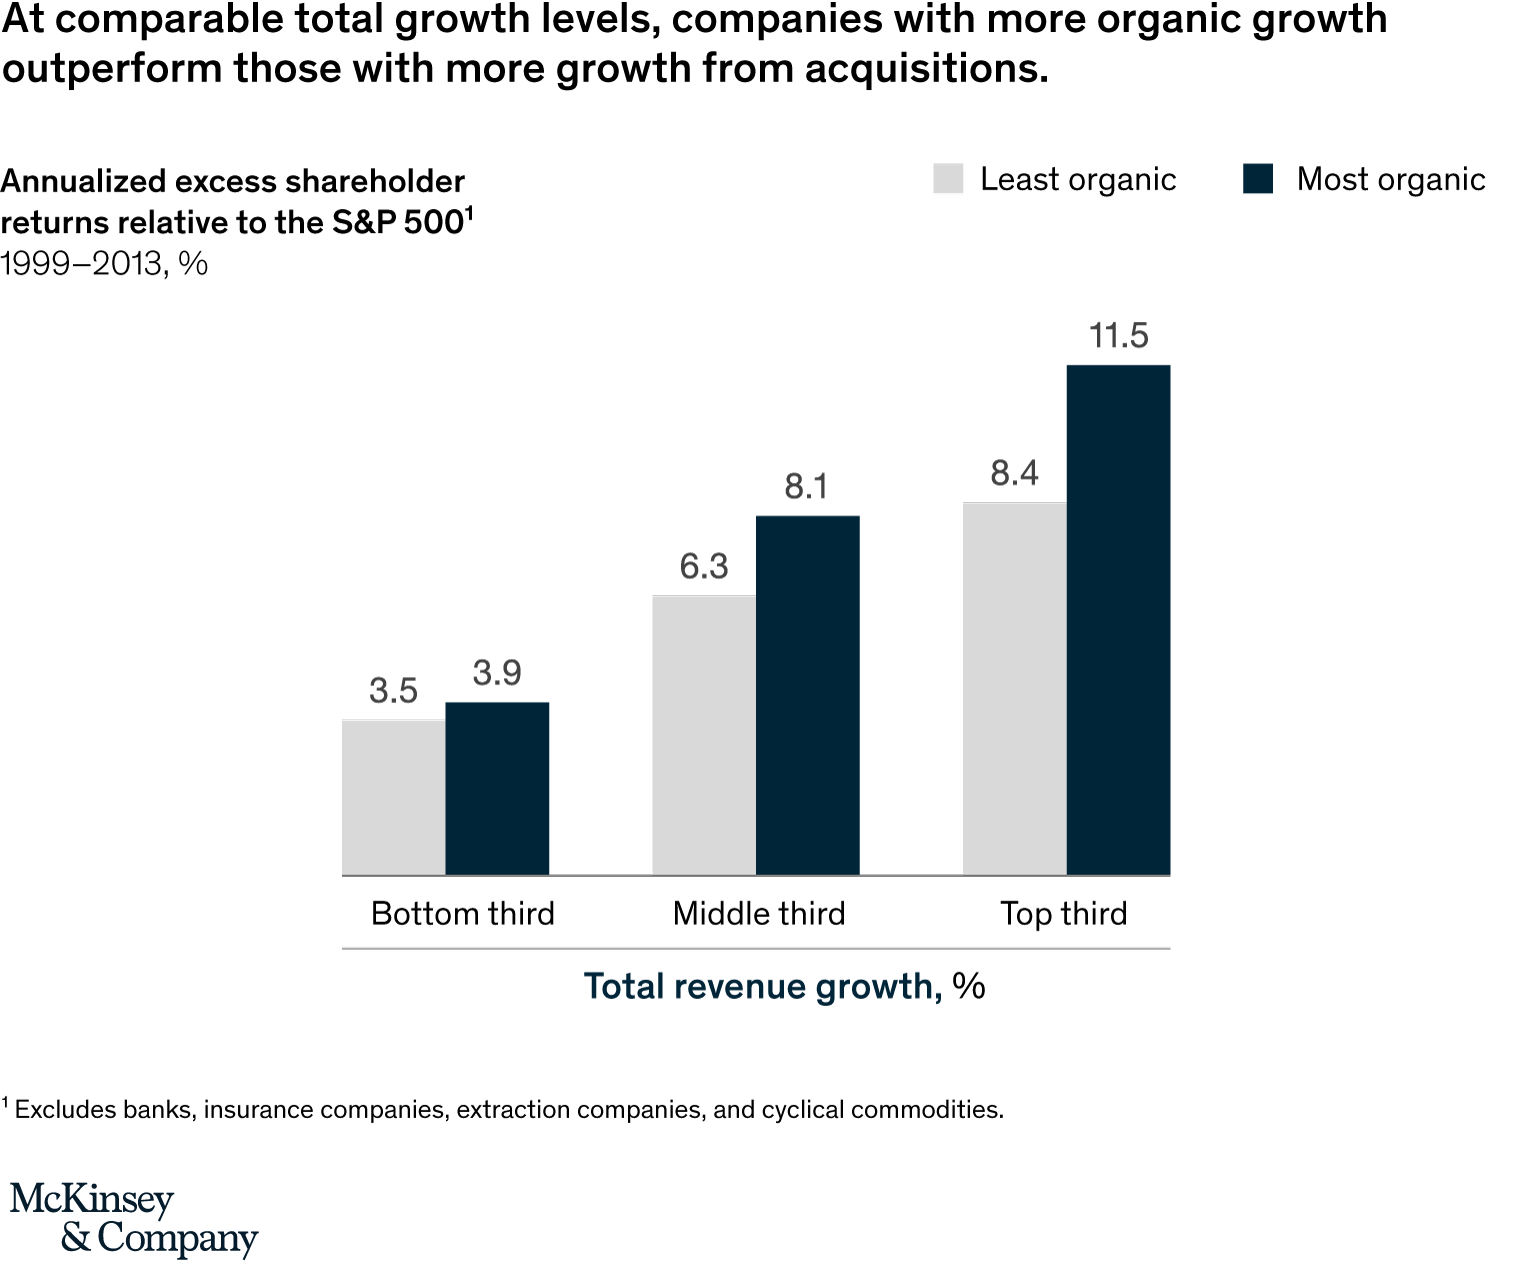 At comparable total growth levels, companies with more organic growth outperform those with more growth from acquisitions.